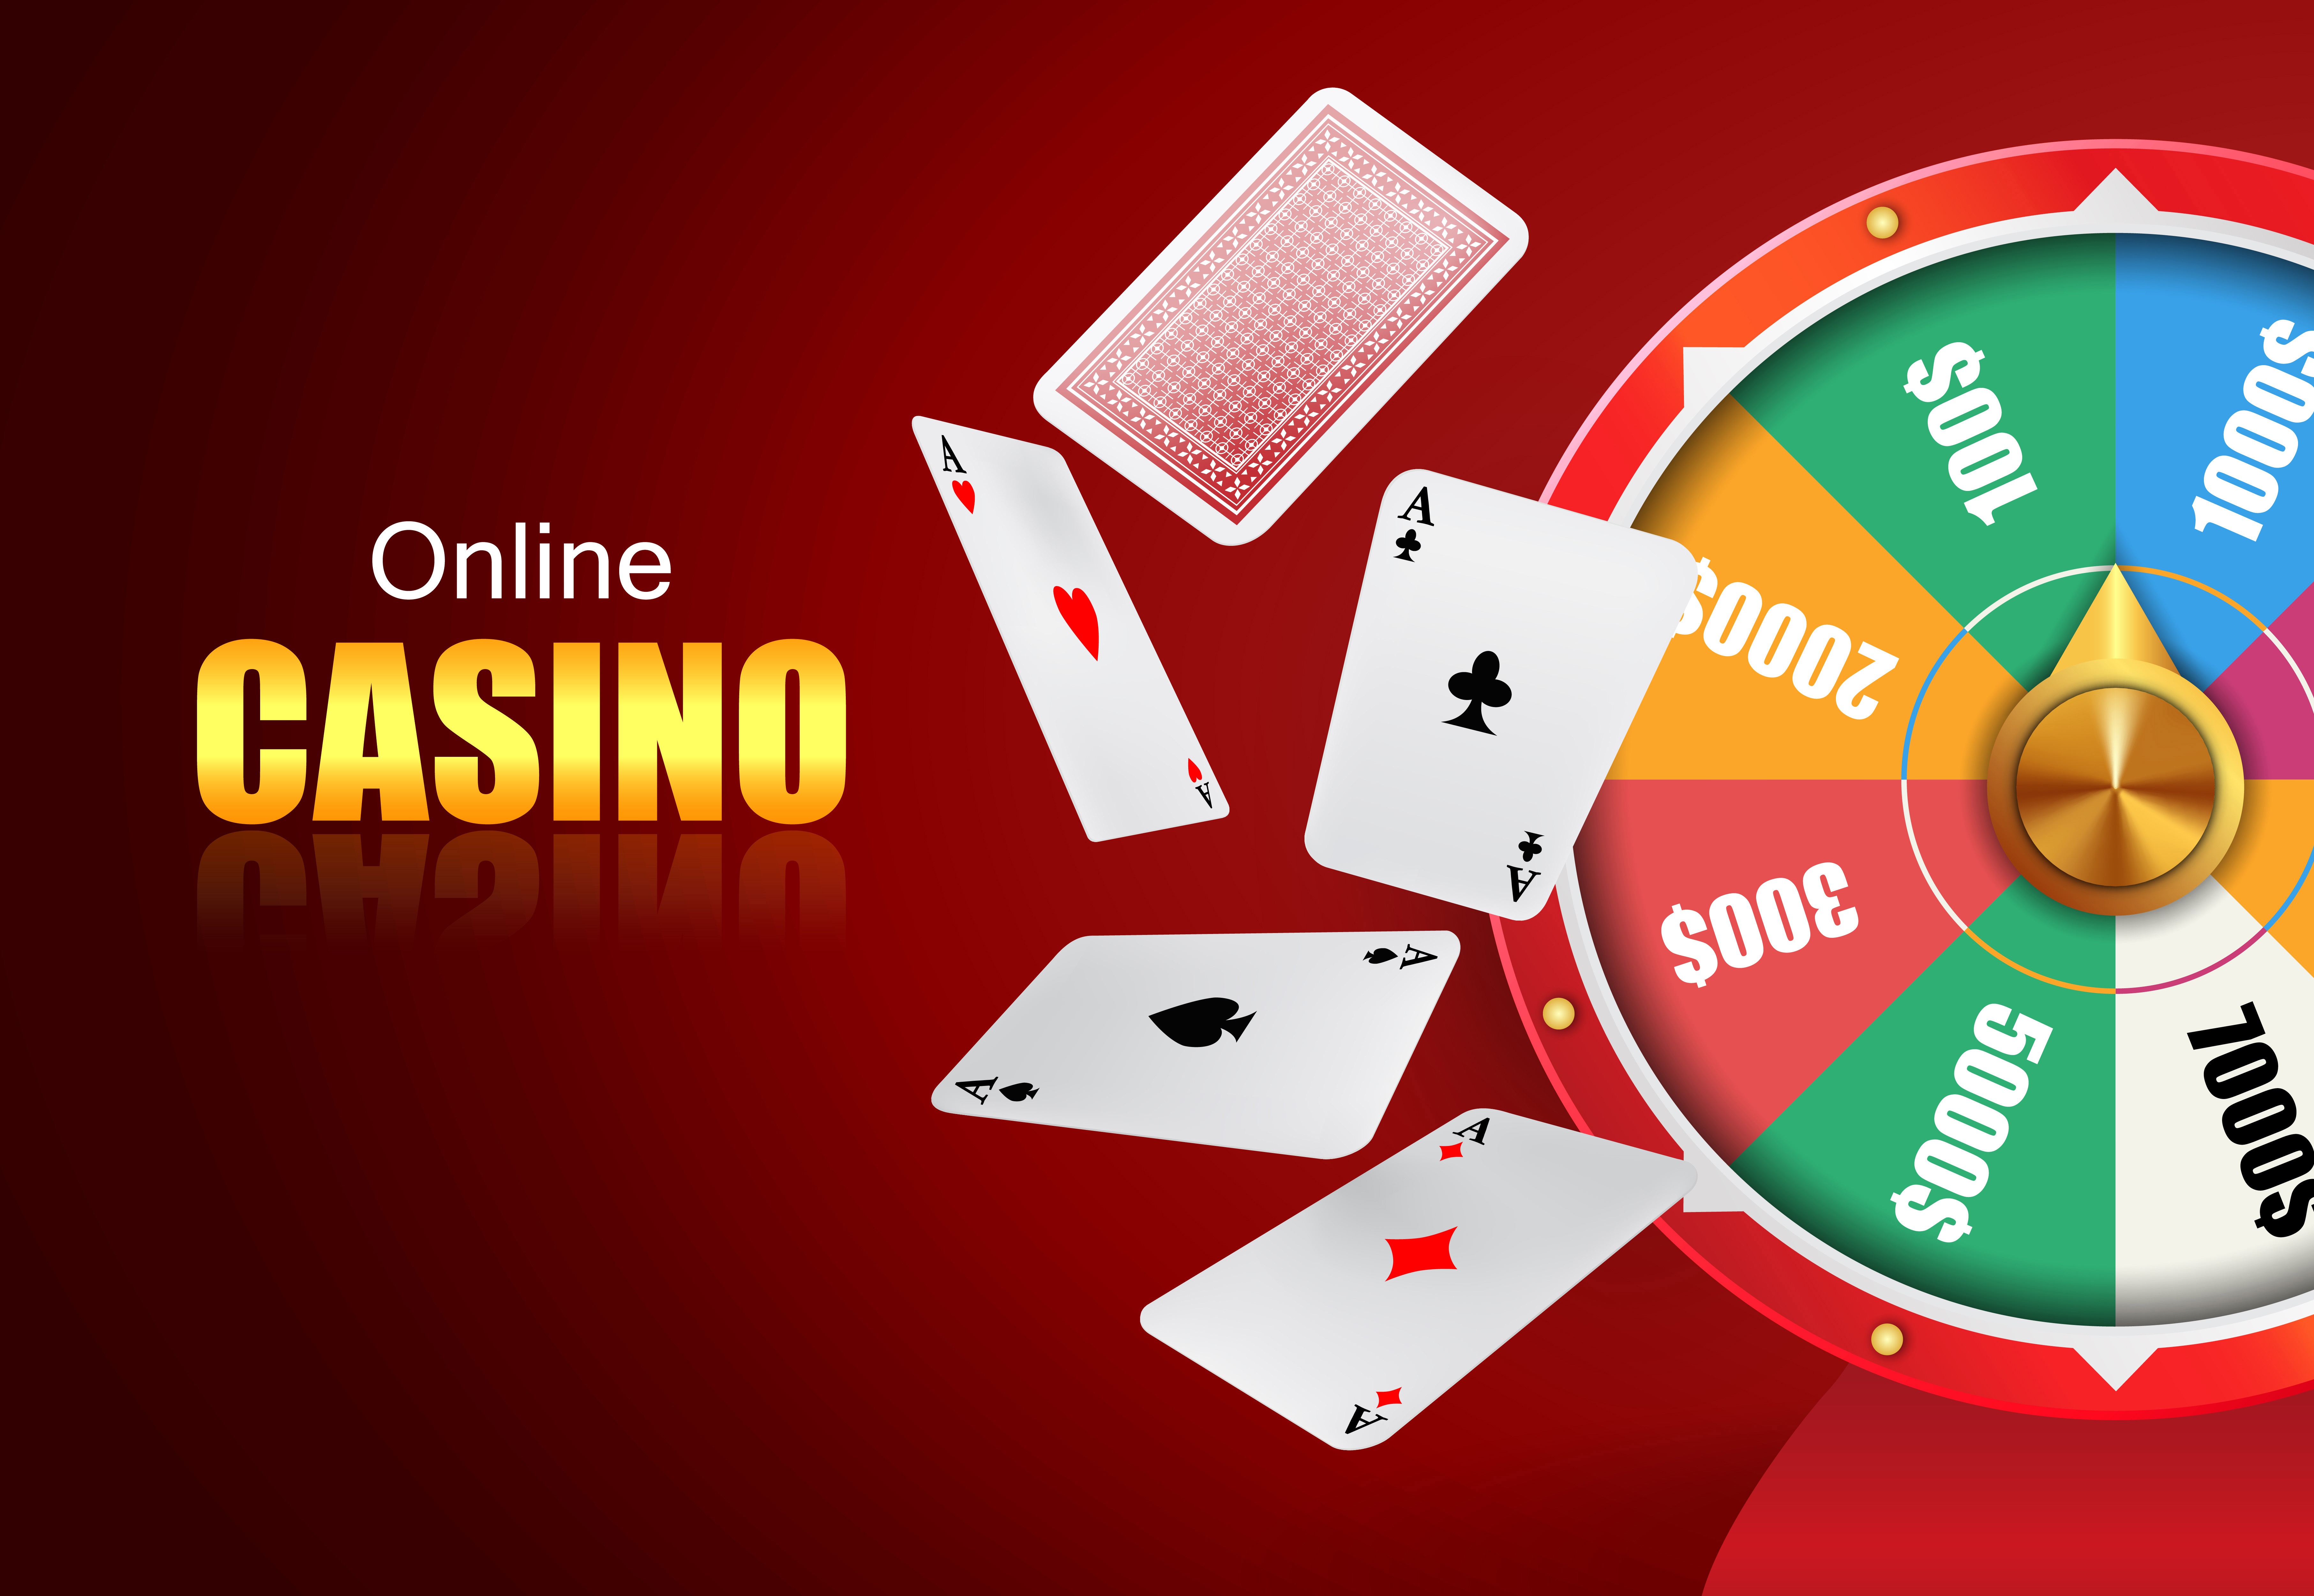 Spotting Trustworthy Platforms: Identifying the Most Reliable Online Casinos in India - What Do Those Stats Really Mean?